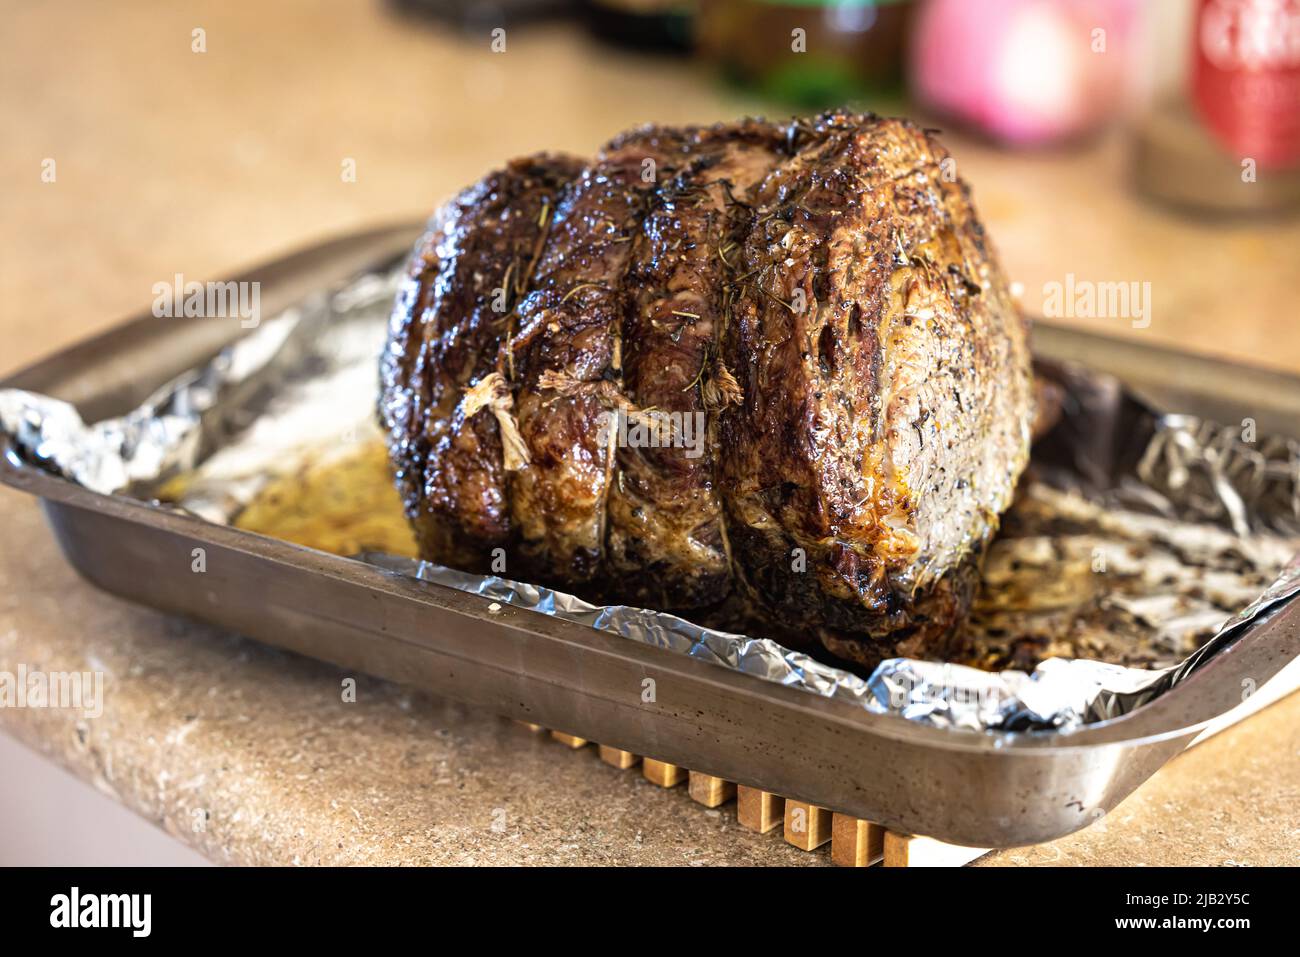 A large prime rib beef roast that was baked and roasted in the oven by a home gourmet chef for a holiday Christmas dinner Stock Photo